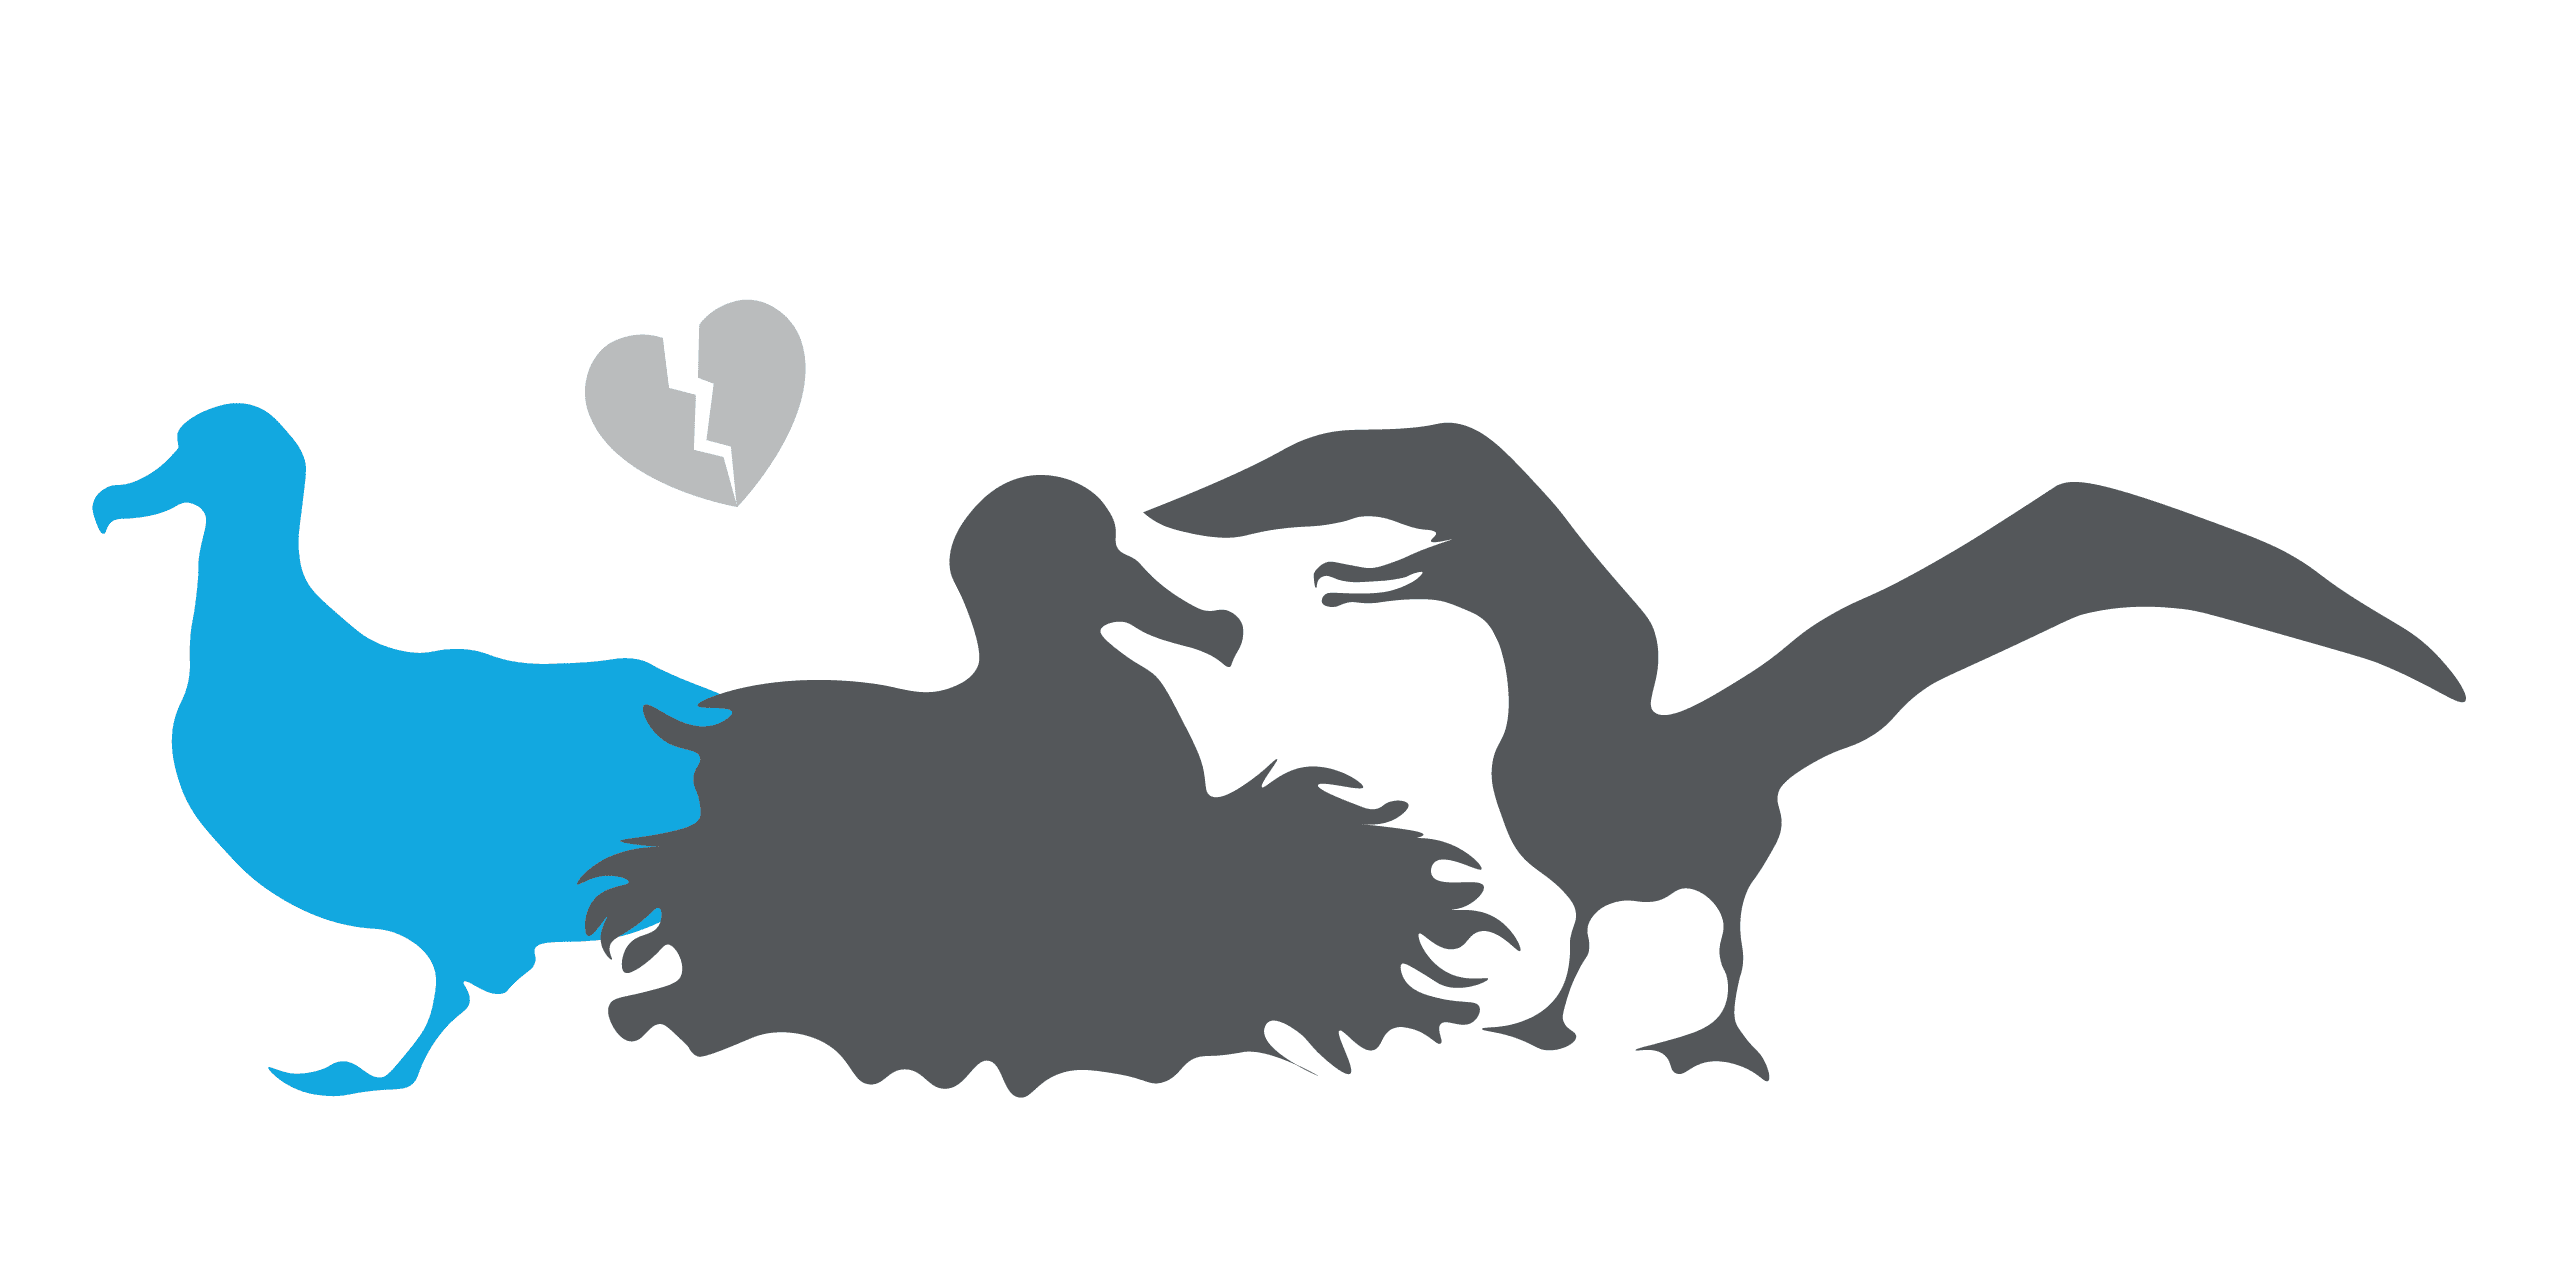 Forced divorce, which is something wandering albatrosses experience, is when a male intruder steals a female away from her timid male partner (blue).